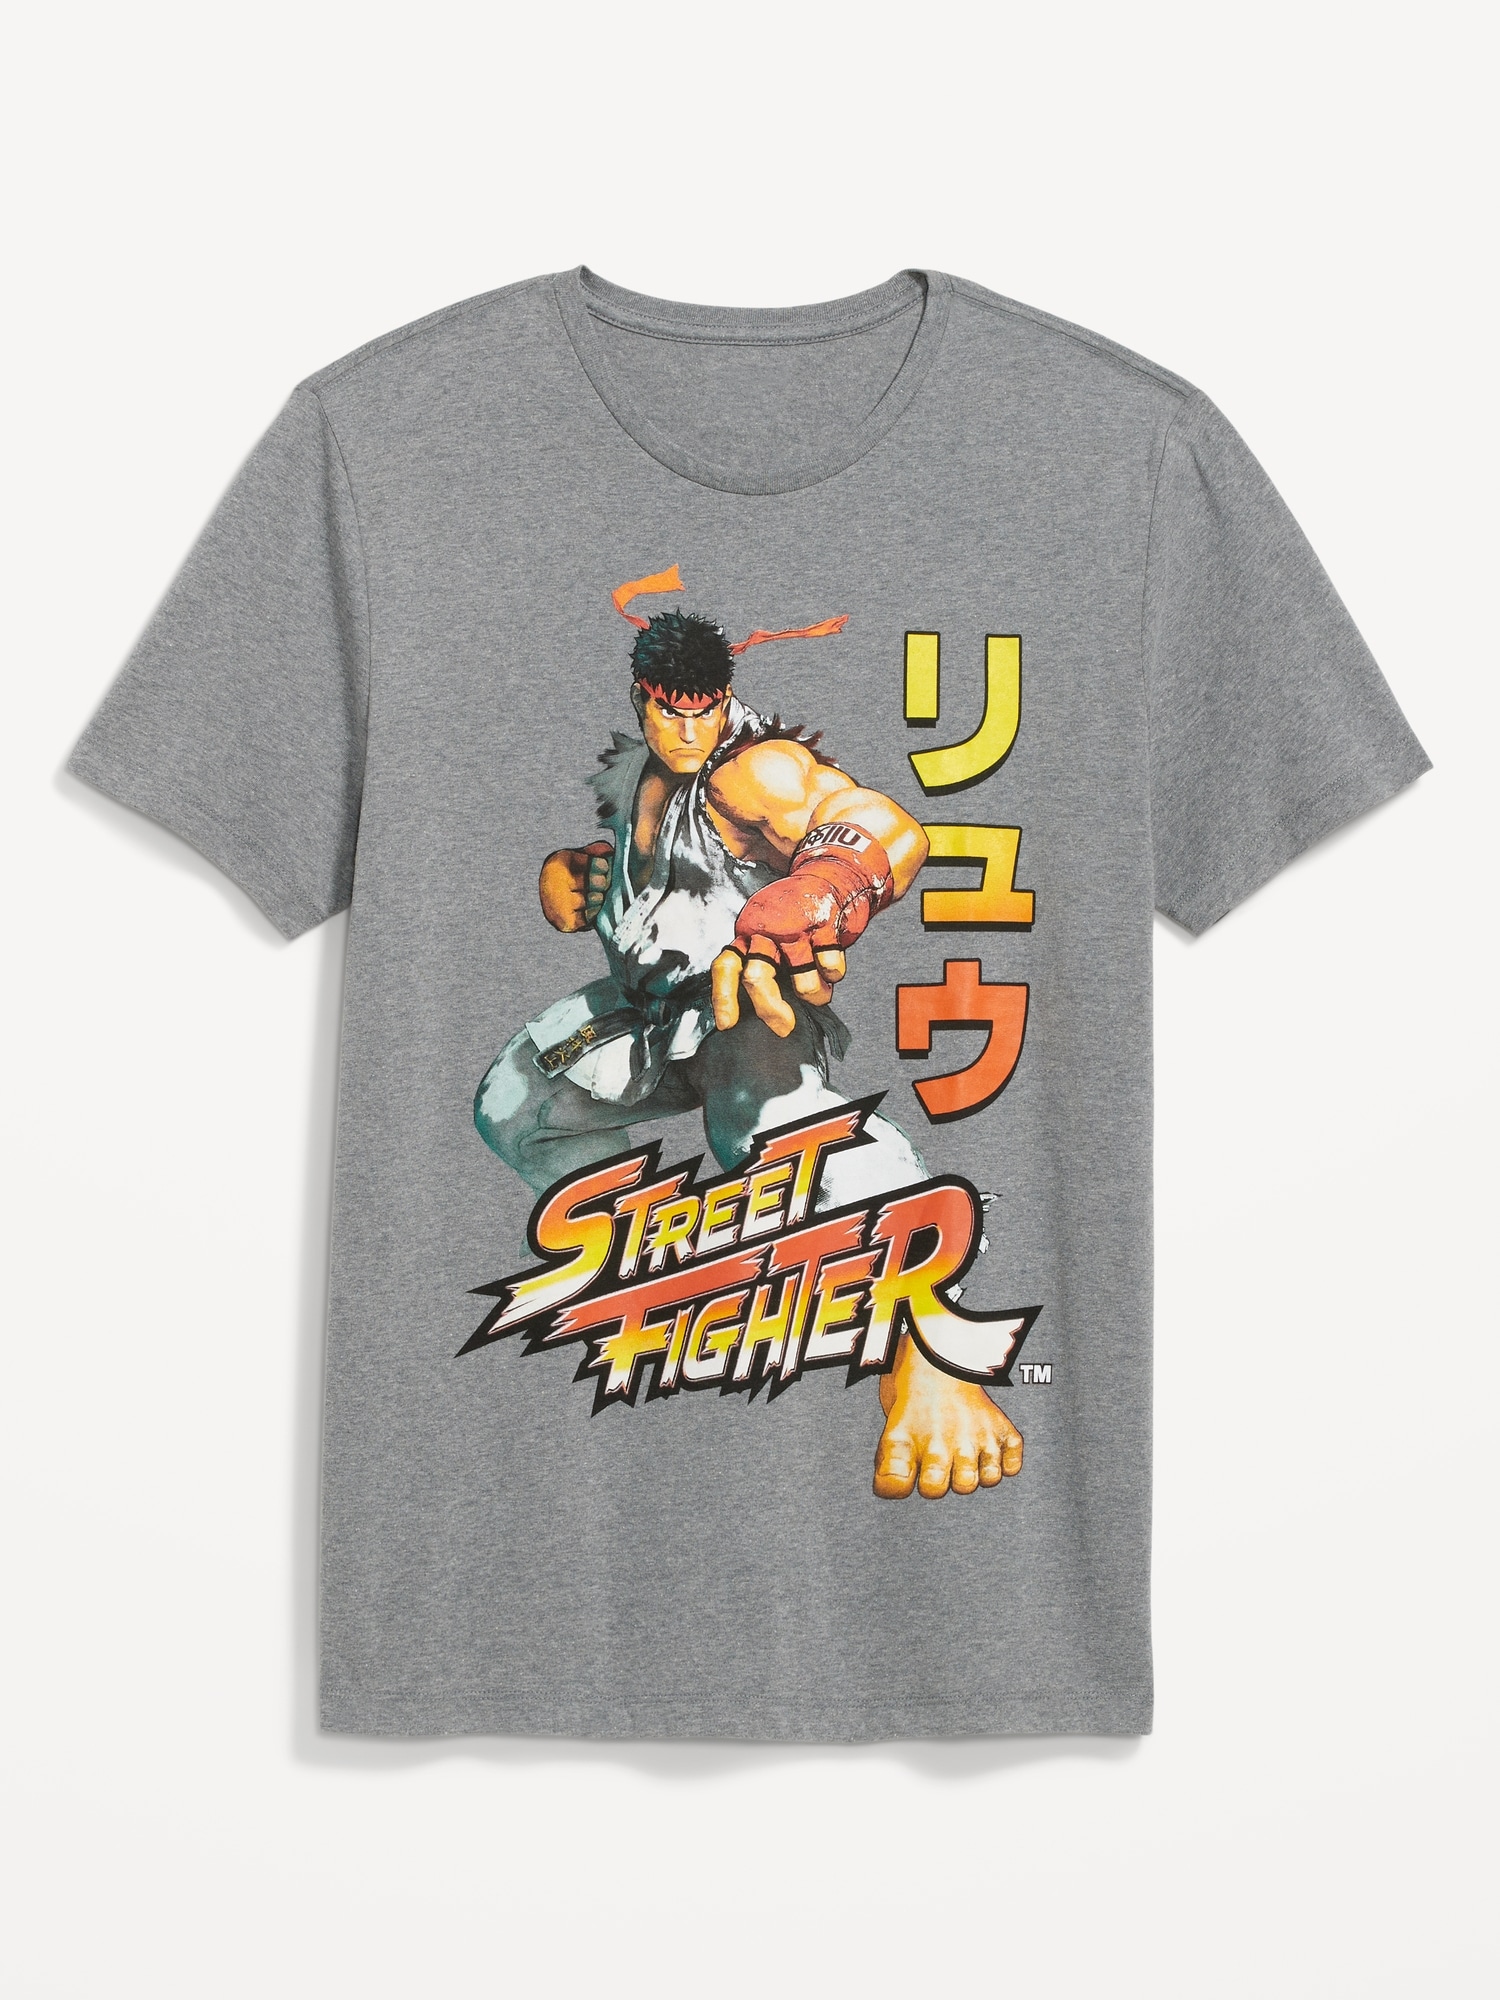 Street Fighter™ Gender-Neutral T-Shirt for Adults